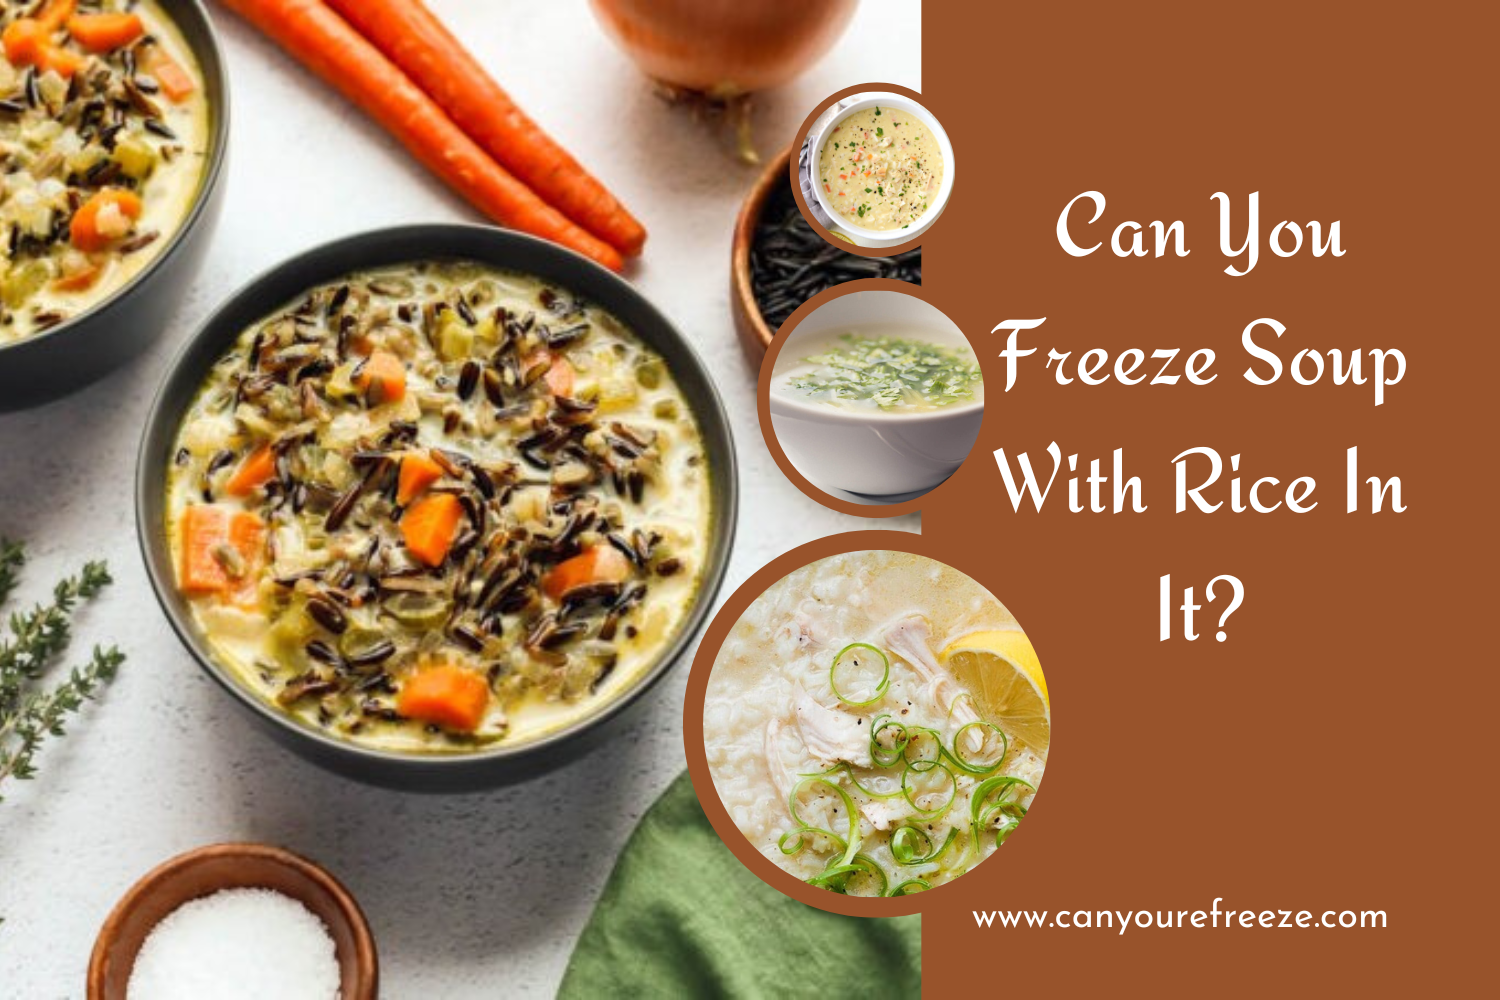 Can You Freeze Soup With Rice In It